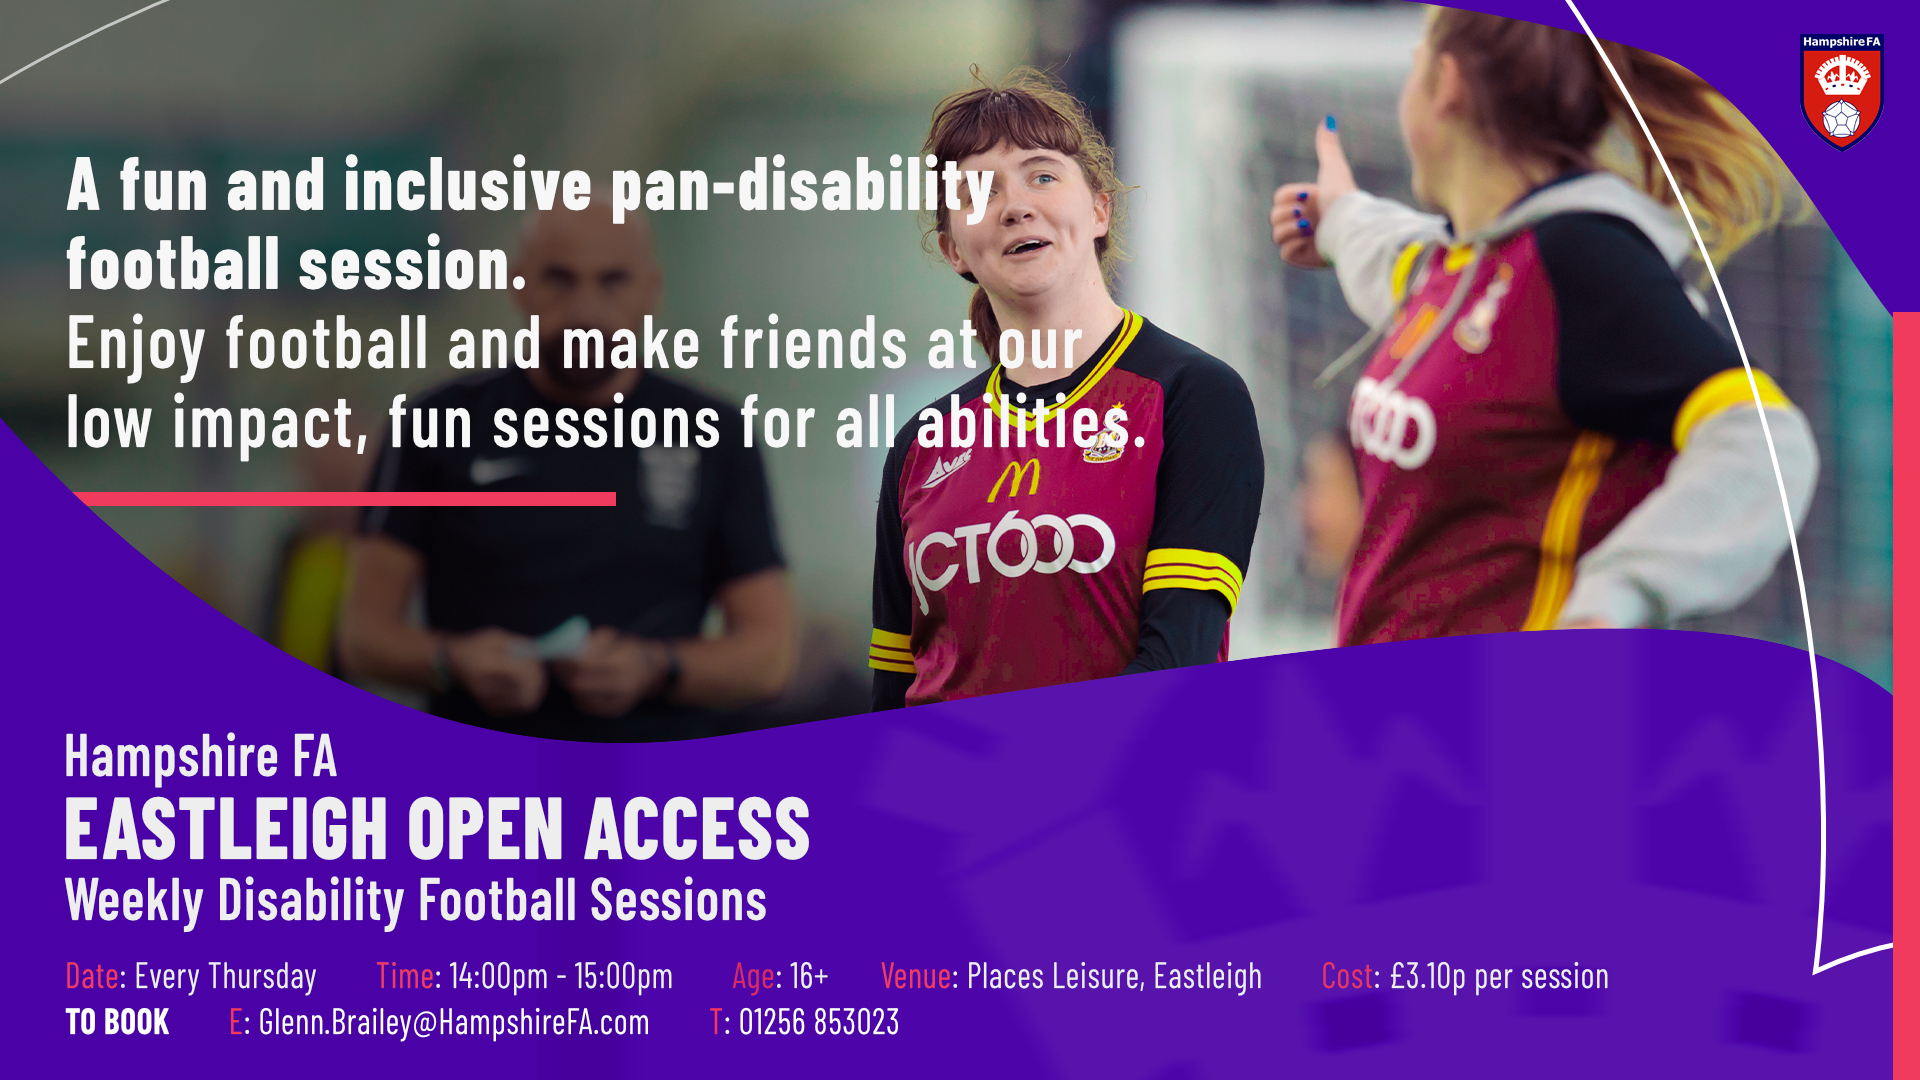 Eastleigh Open Access Pan-Disability Football Session